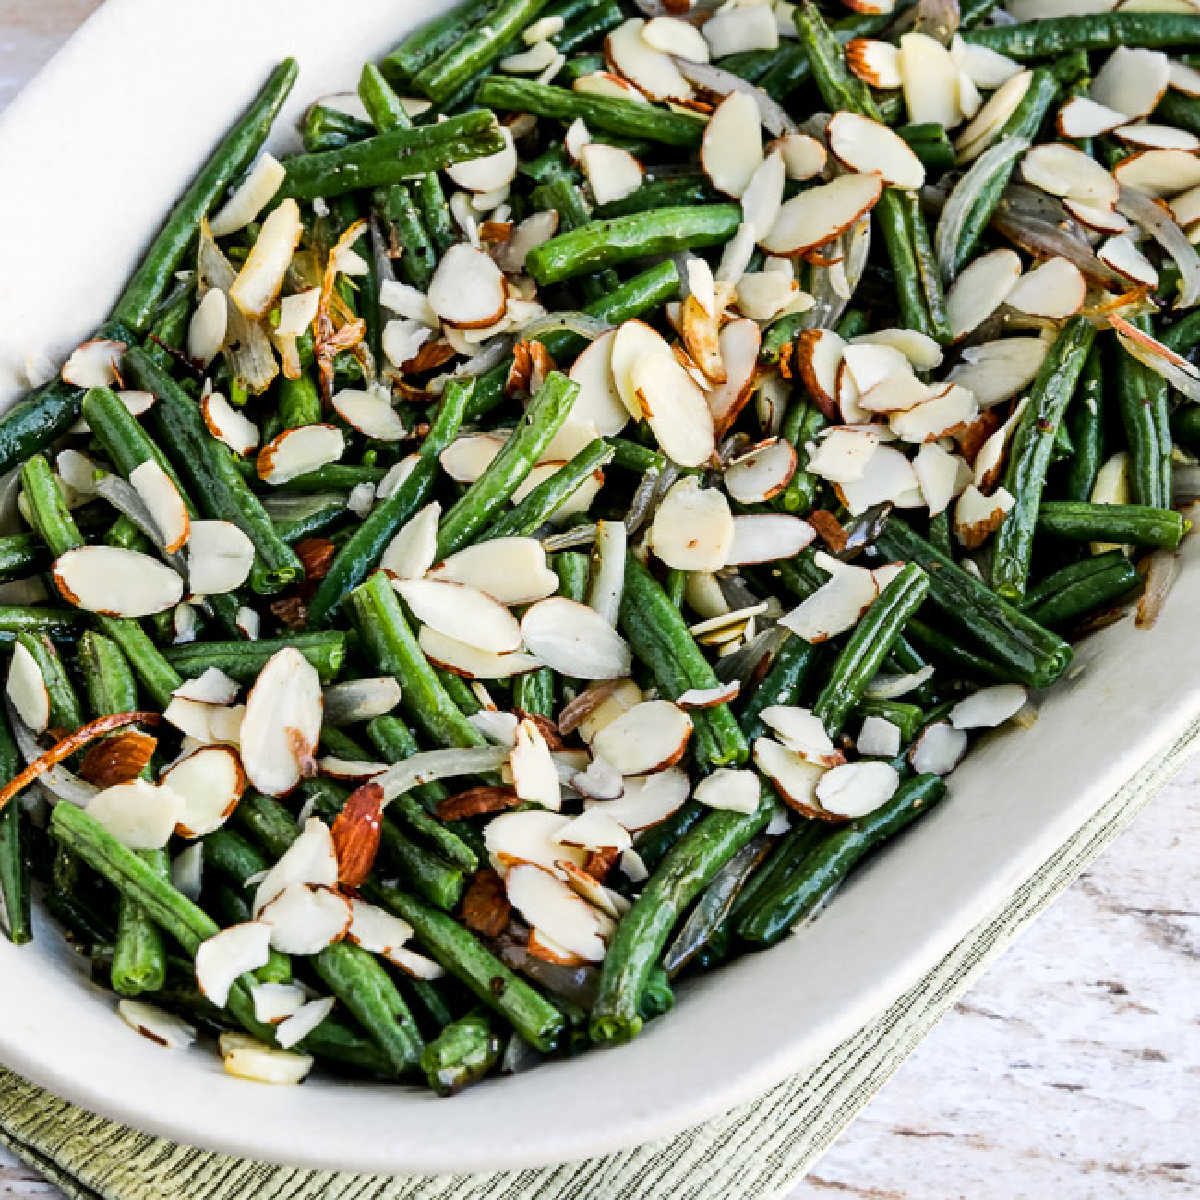 Garlic-Roasted Green Beans with Shallots and Almonds shown on serving platter